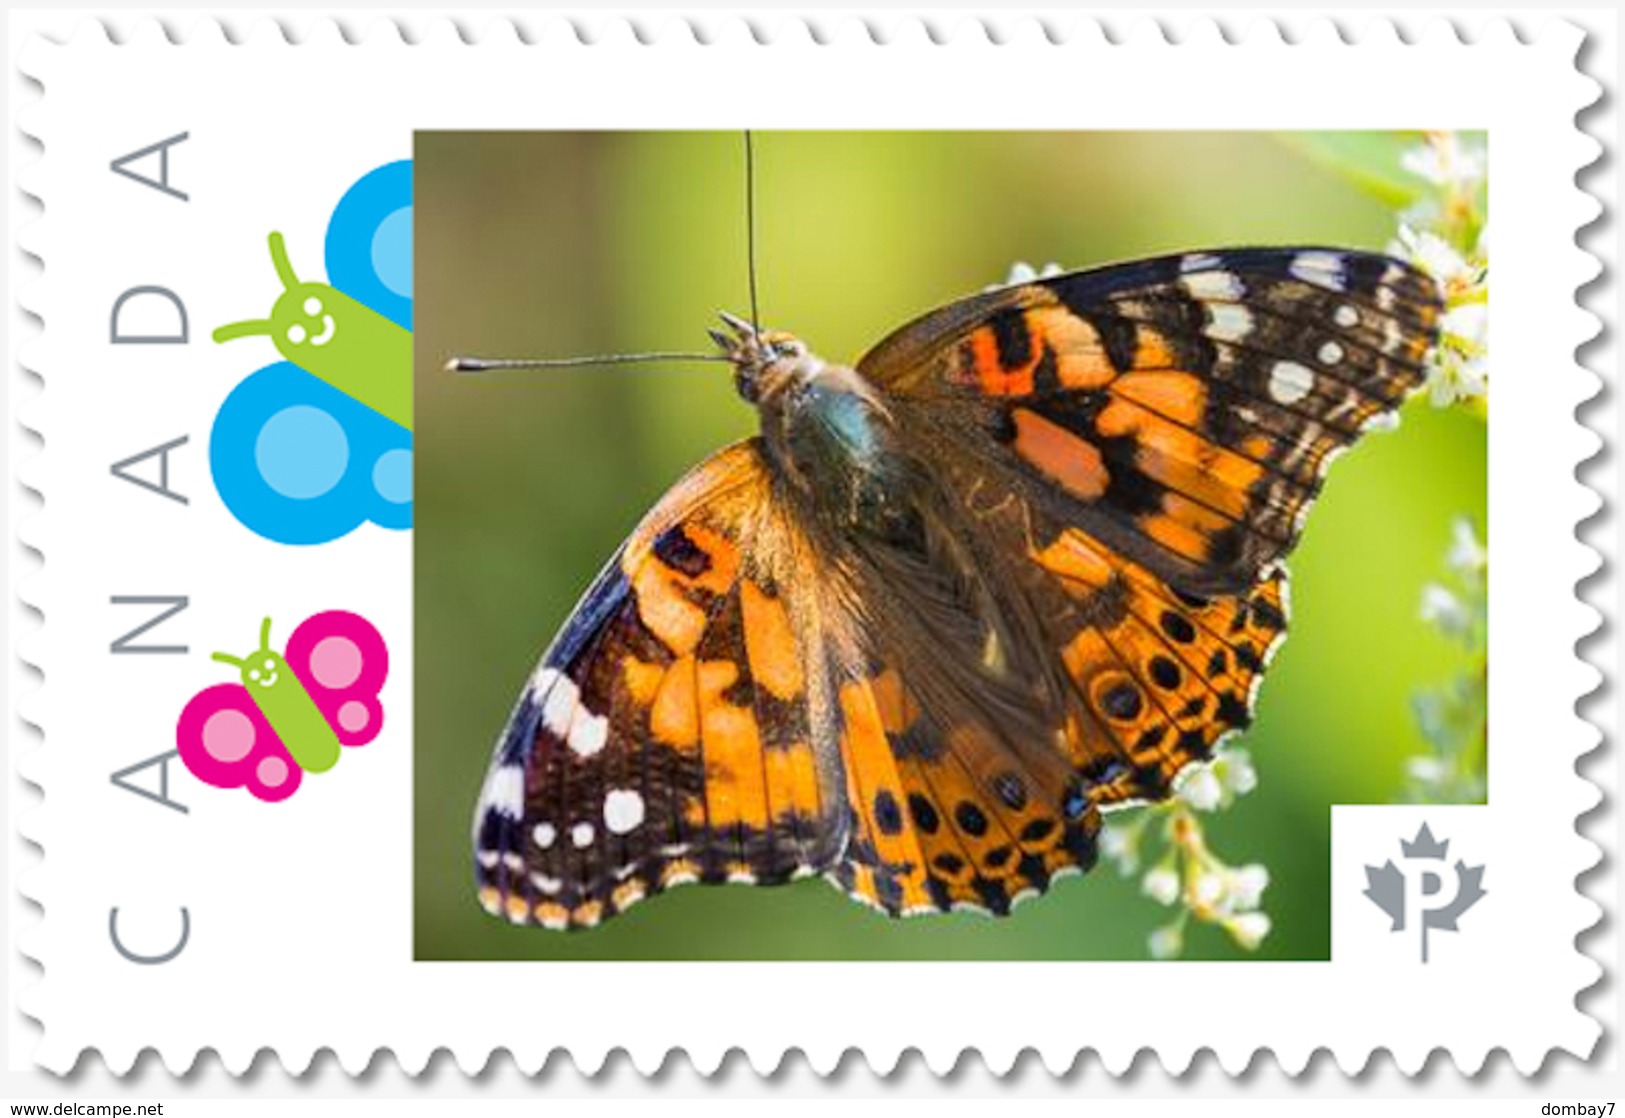 NEW!  BUTTERFLY Angel Top View Unique Picture Postage Stamp MNH Canada 2018 P18-01sn13 - Papillons